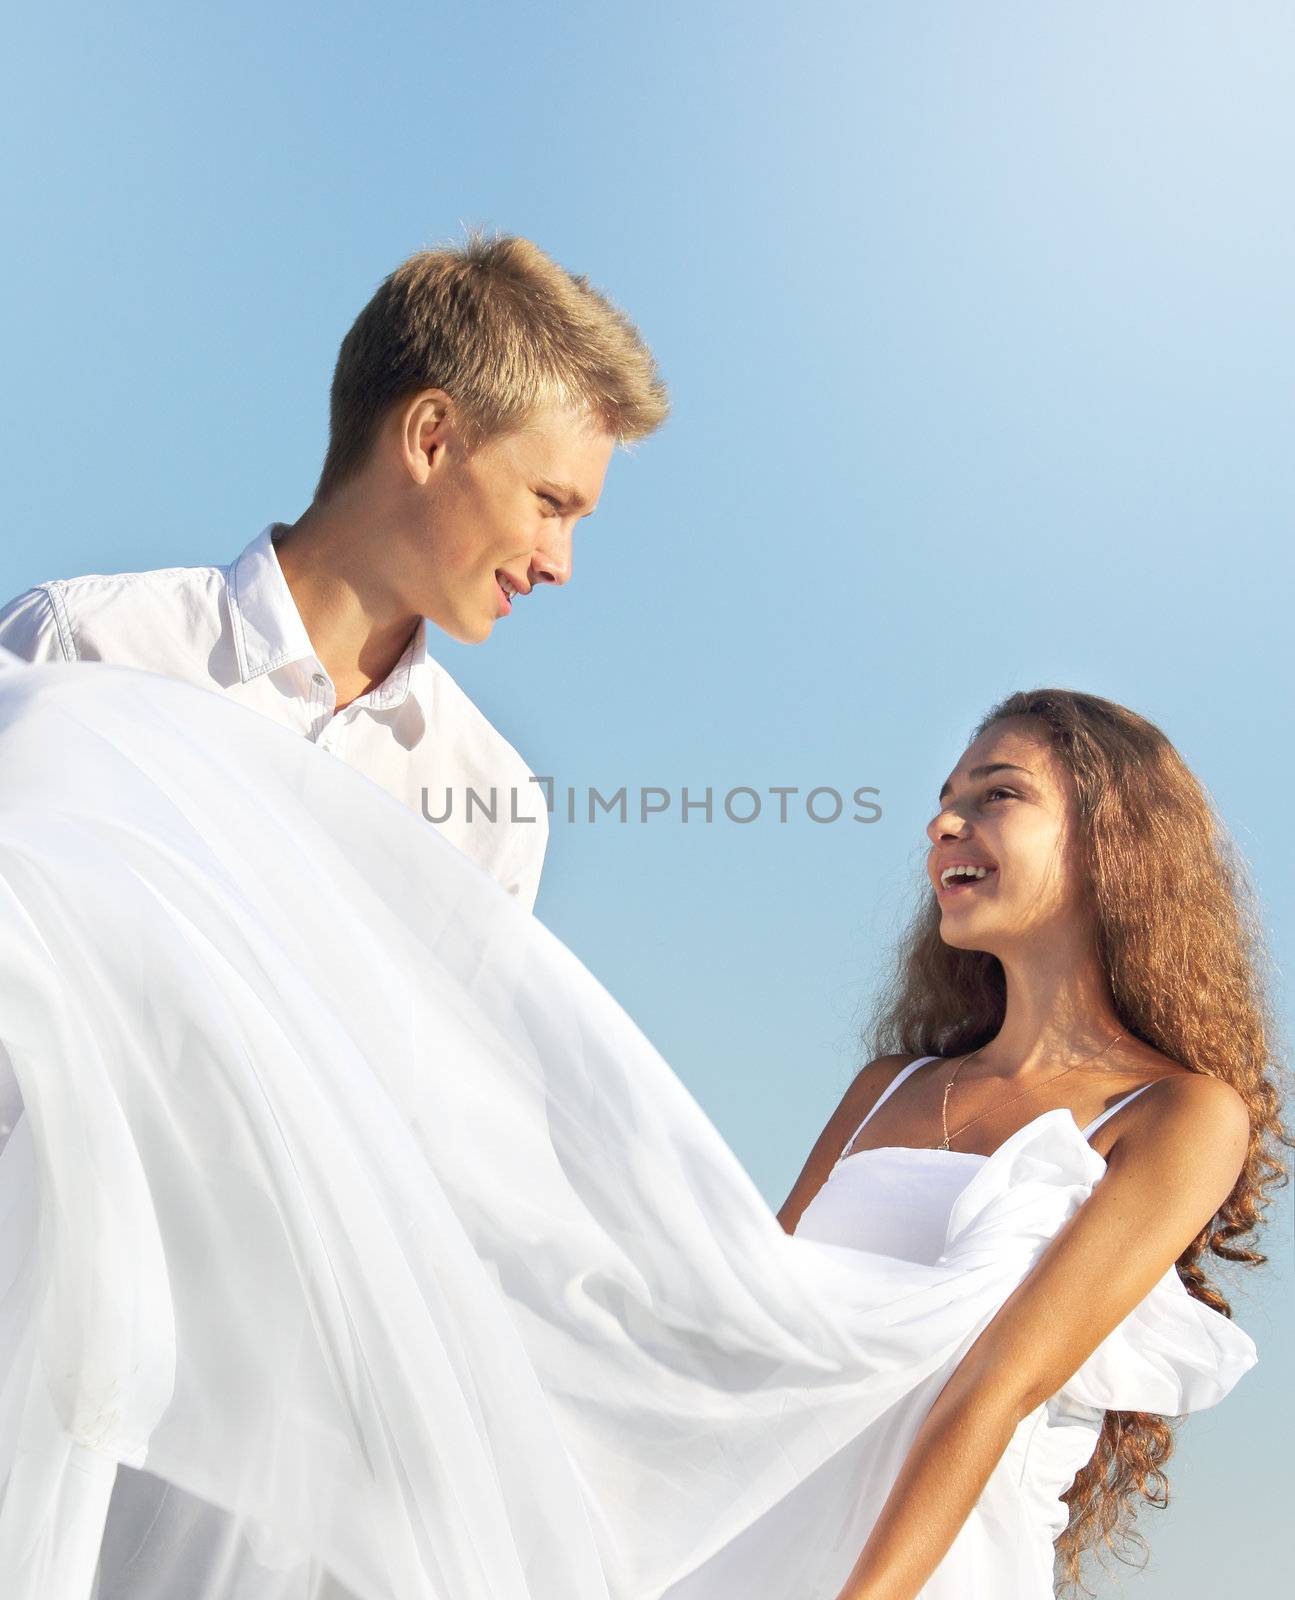 Romantic couple outdoors at sunny summer day